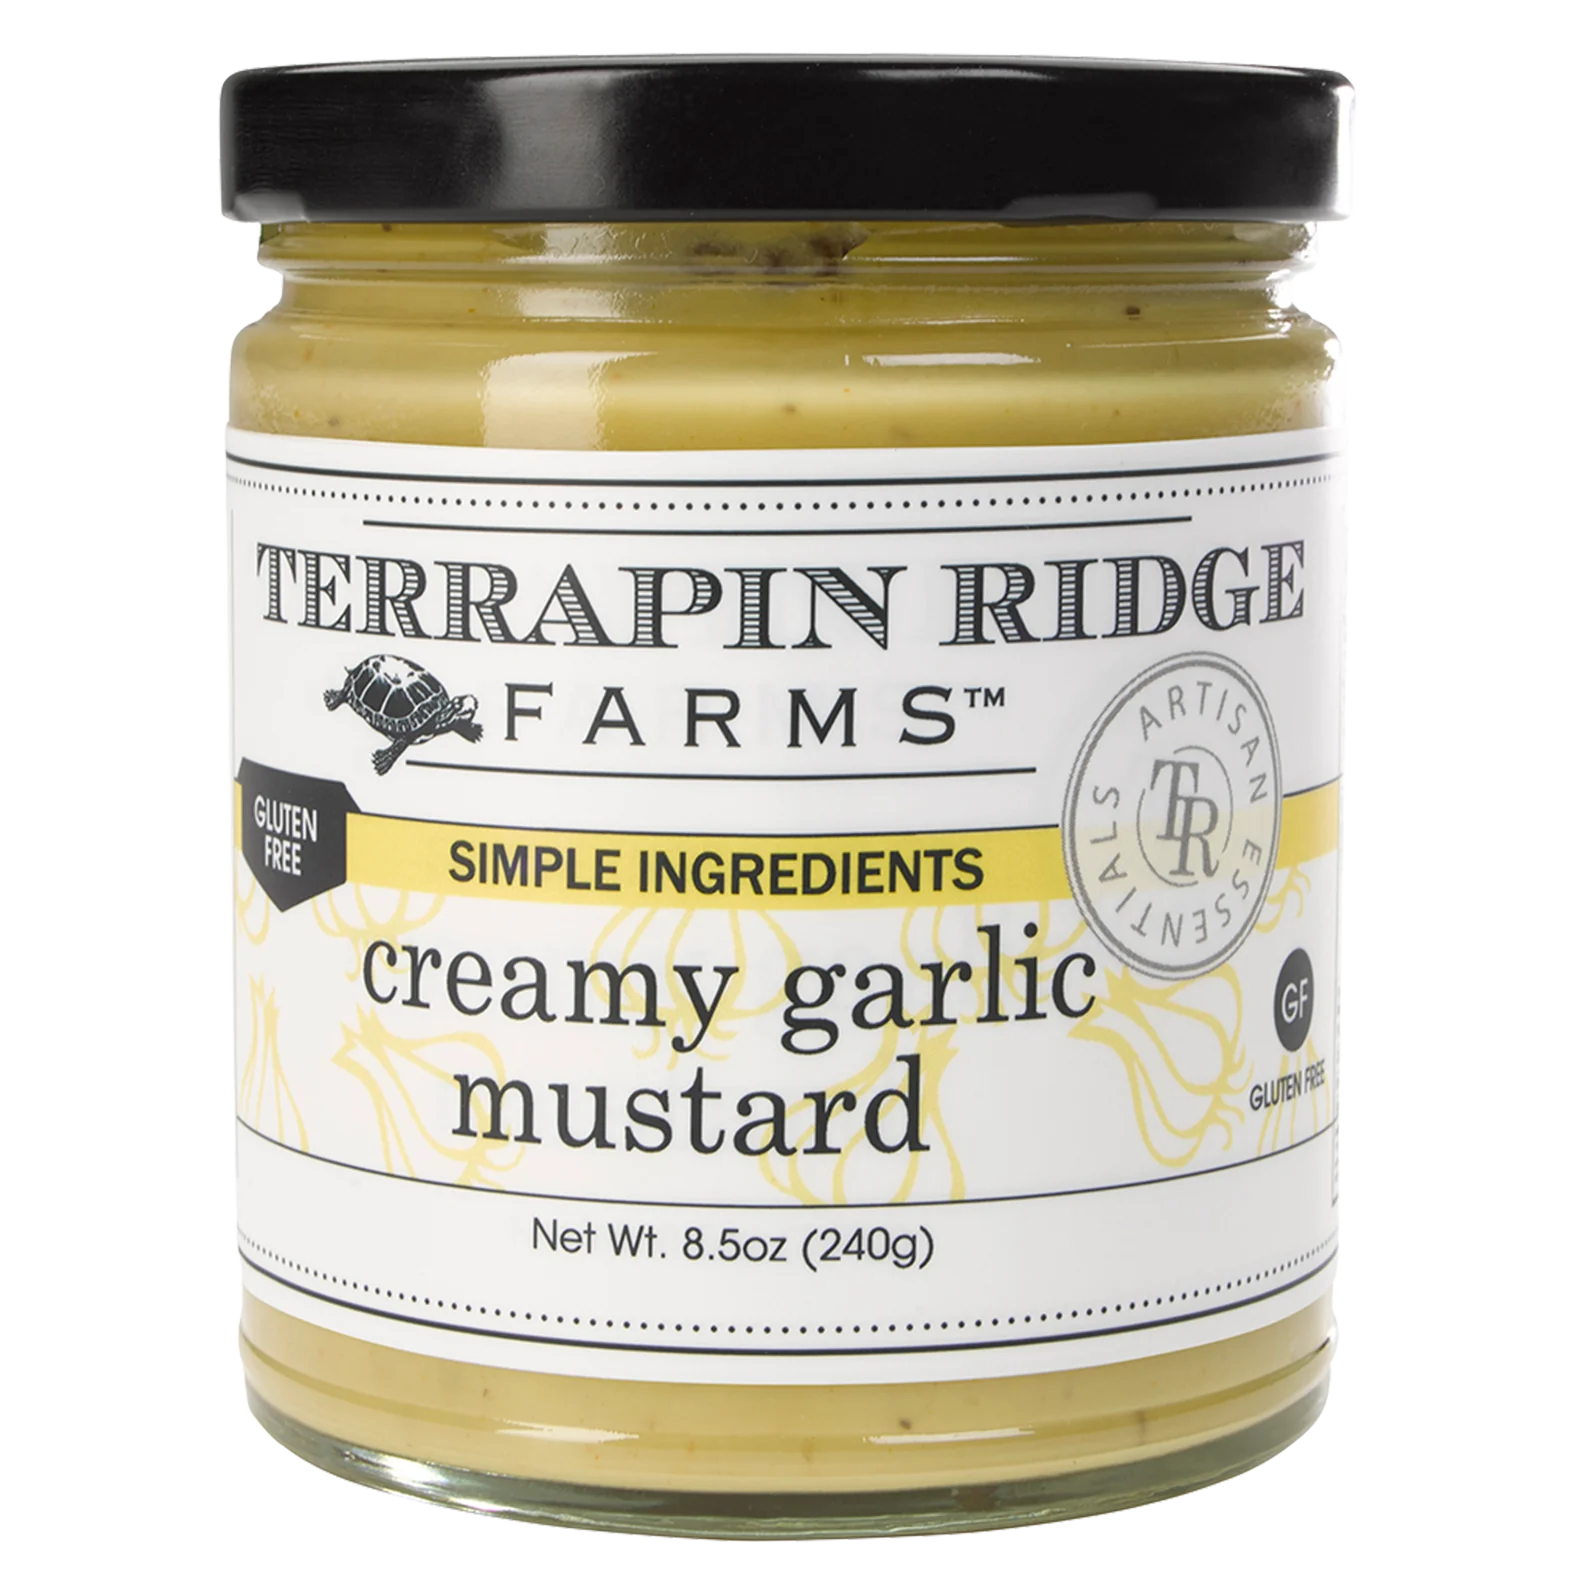 Terrapin Ridge Farms offers a delightful twist on traditional mustard with Terrapin Ridge Creamy Garlic Mustard. Made with high-quality ingredients including Neufachtel cheese, this creamy mustard is the perfect addition to any dish.